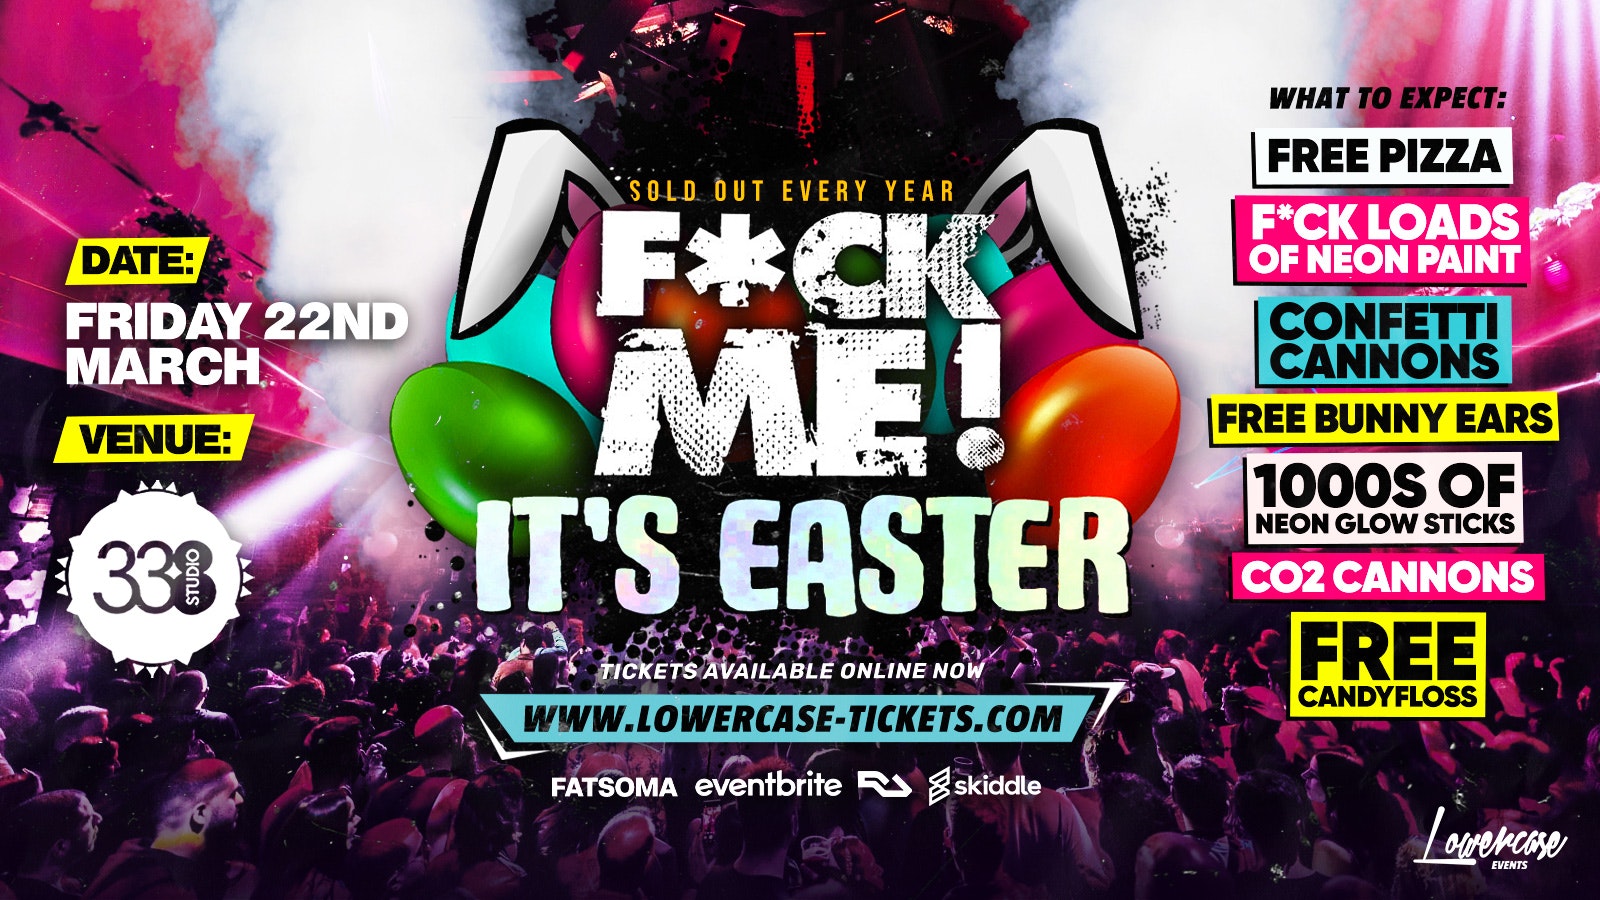 F*CK ME ITS EASTER @ STUDIO 338 🎉🐣 – FIRST 400 TICKETS ARE ONLY £3!